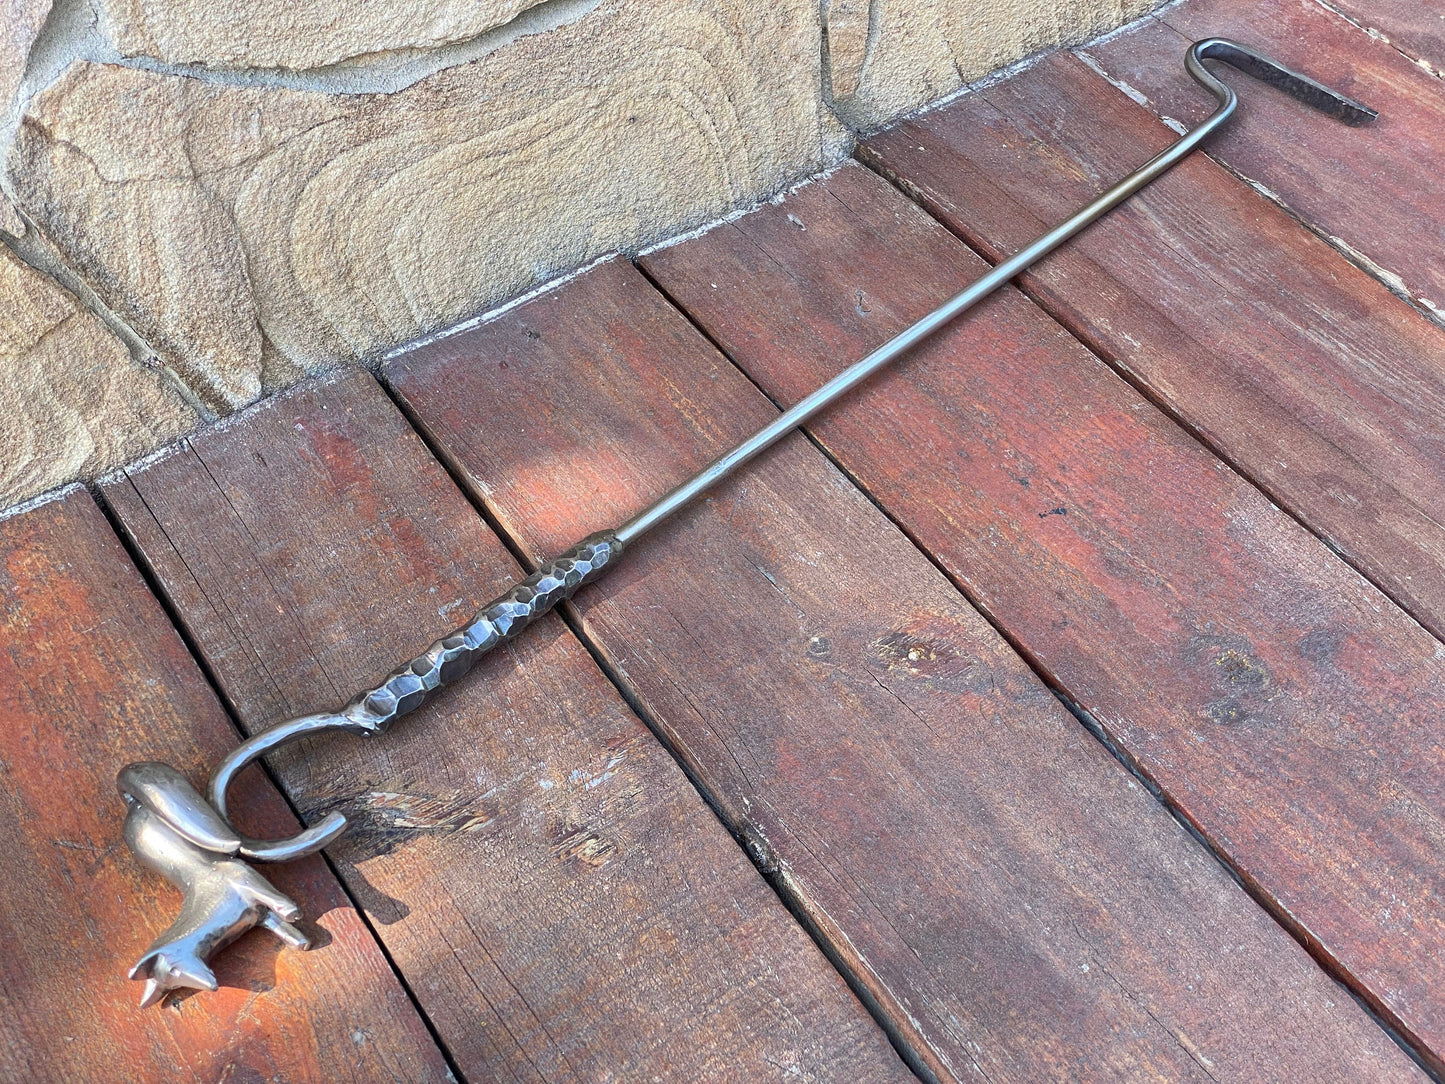 Fire poker, fox, stainless steel, Christmas, daddy, camp, picnic, camping, BBQ, travelers gift,fire pit,firewood,steel gift,11th anniversary